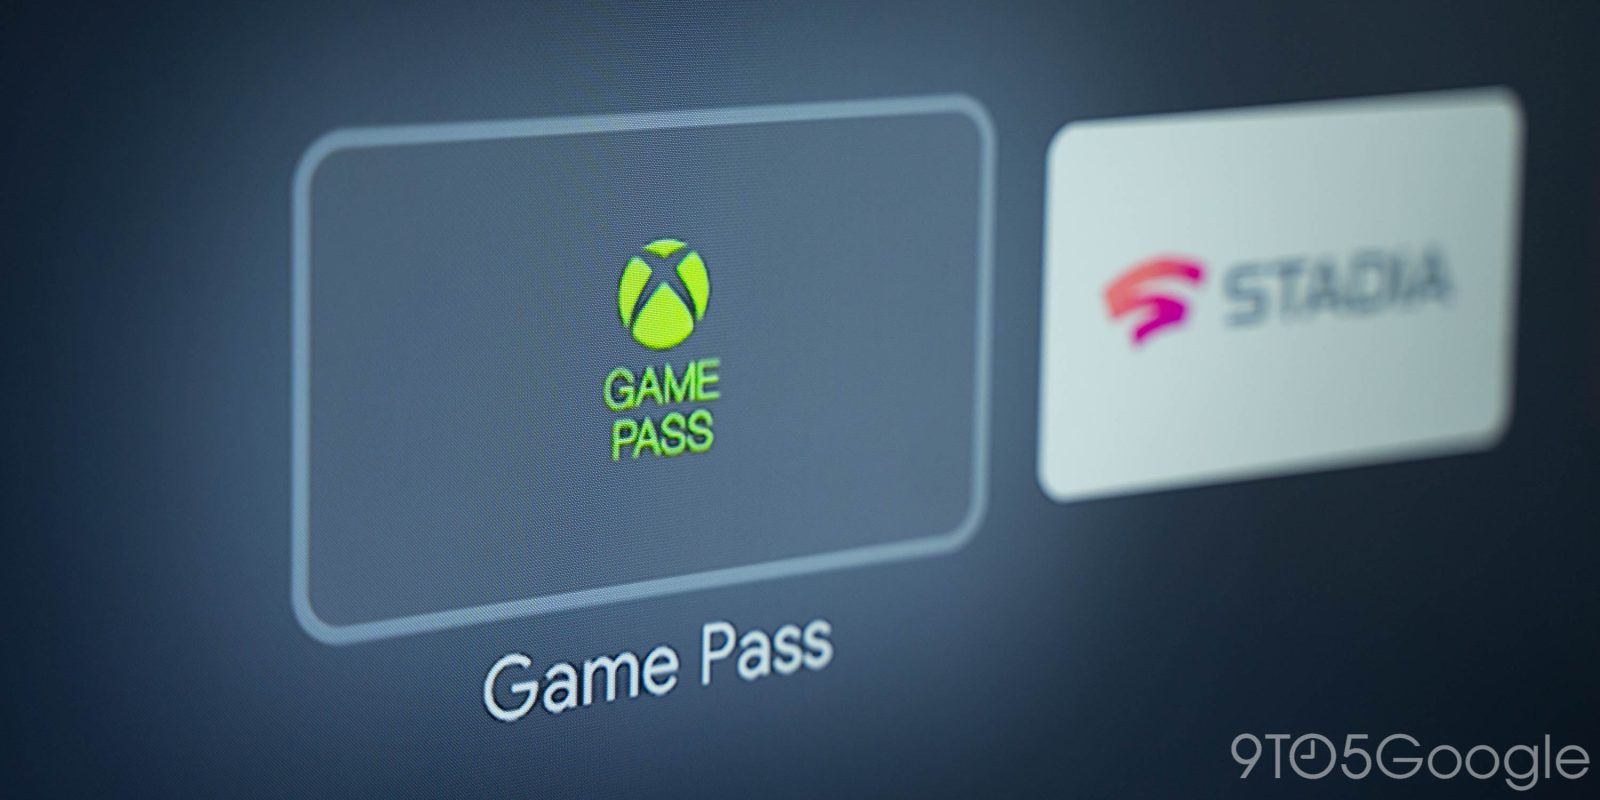 Microsoft announces more regions for Xbox Game Pass, TV apps